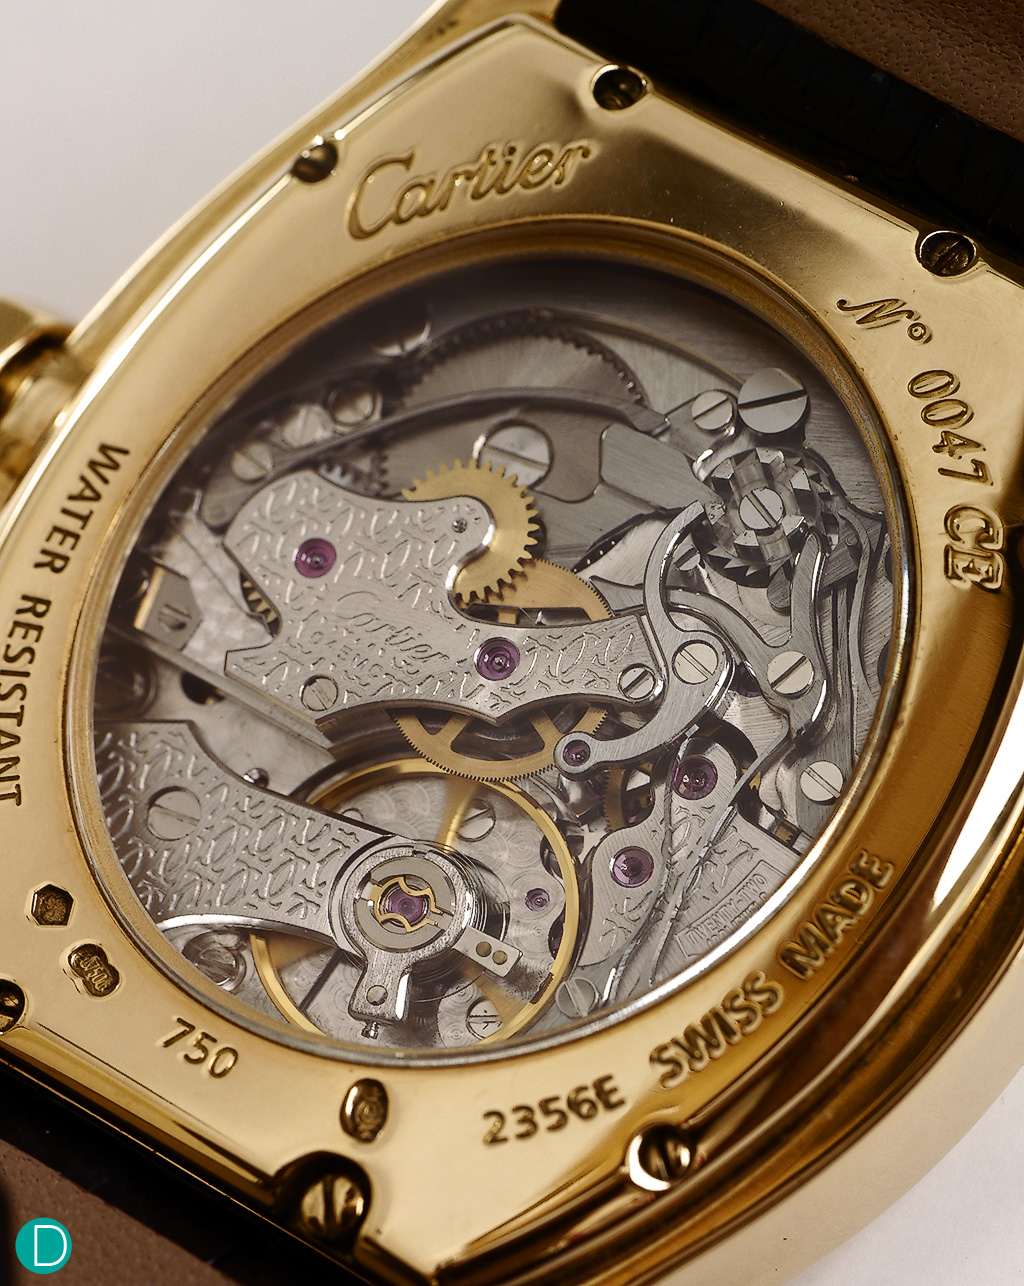 The Cartier Tortue Monopoussoir movemetnt. Made by THA, this is a technically interesting movement.